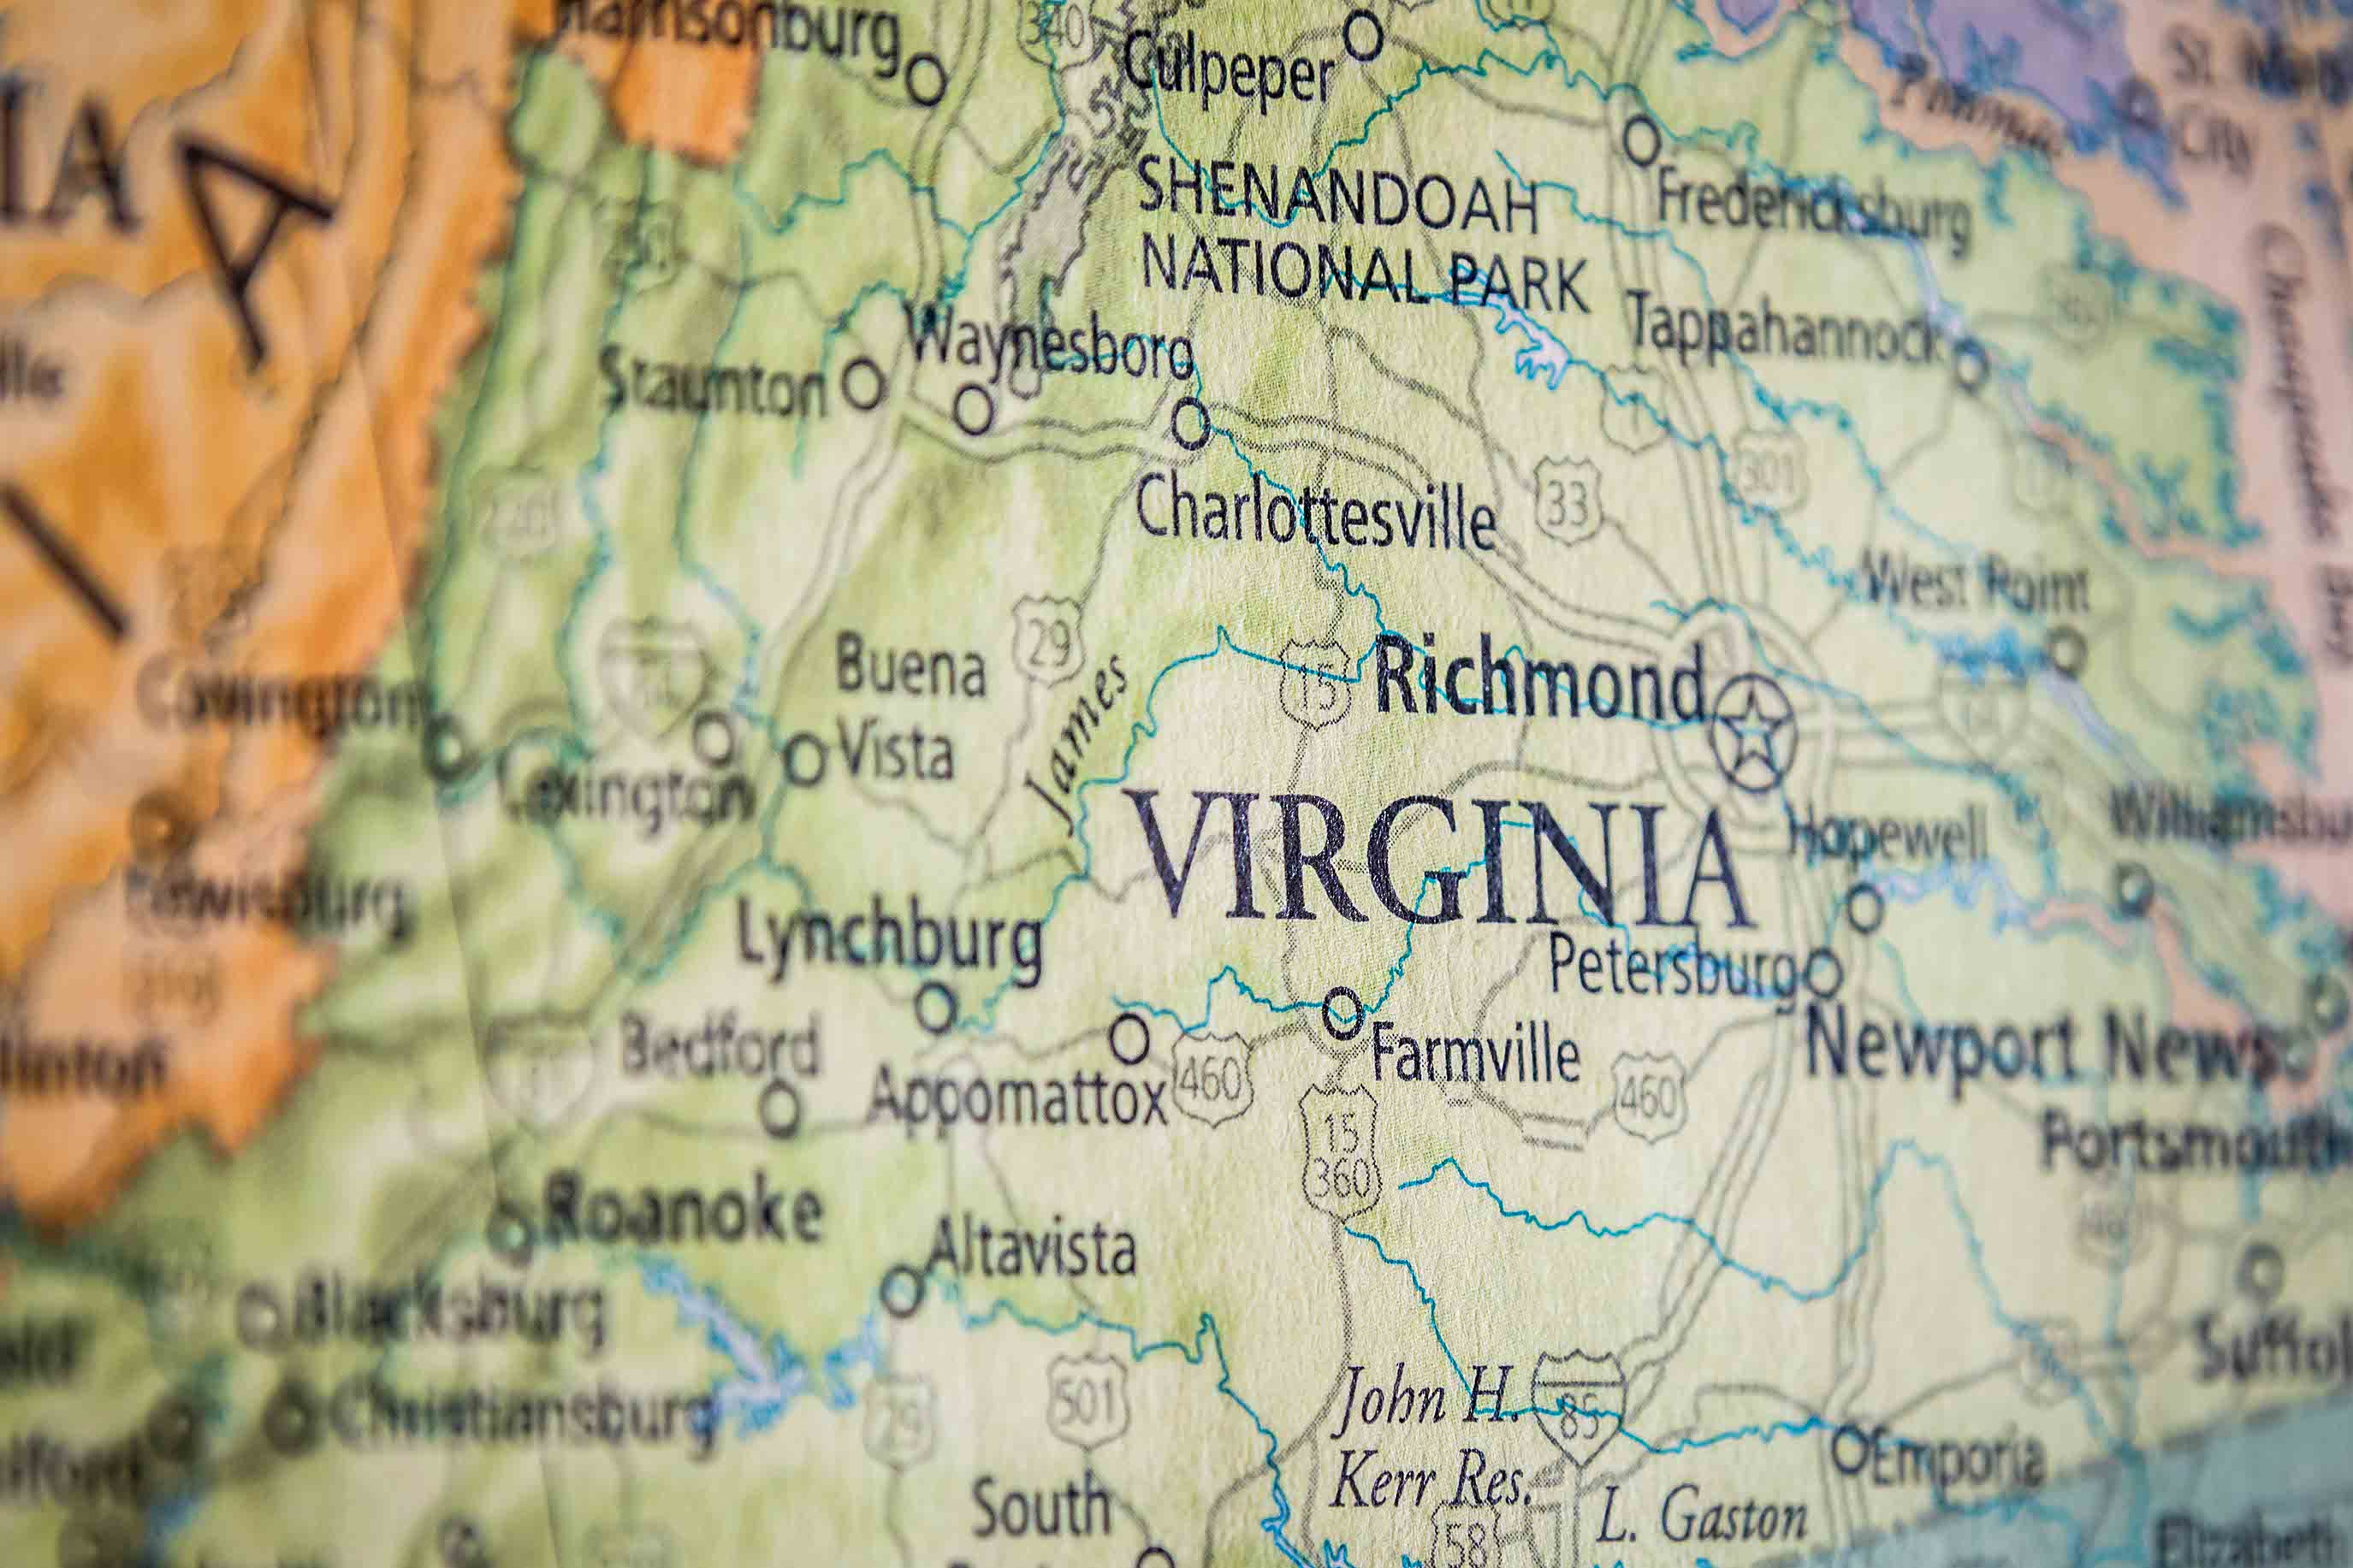 Closeup Selective Focus Of Virginia State On A Geographical And Political State Map Of The USA.